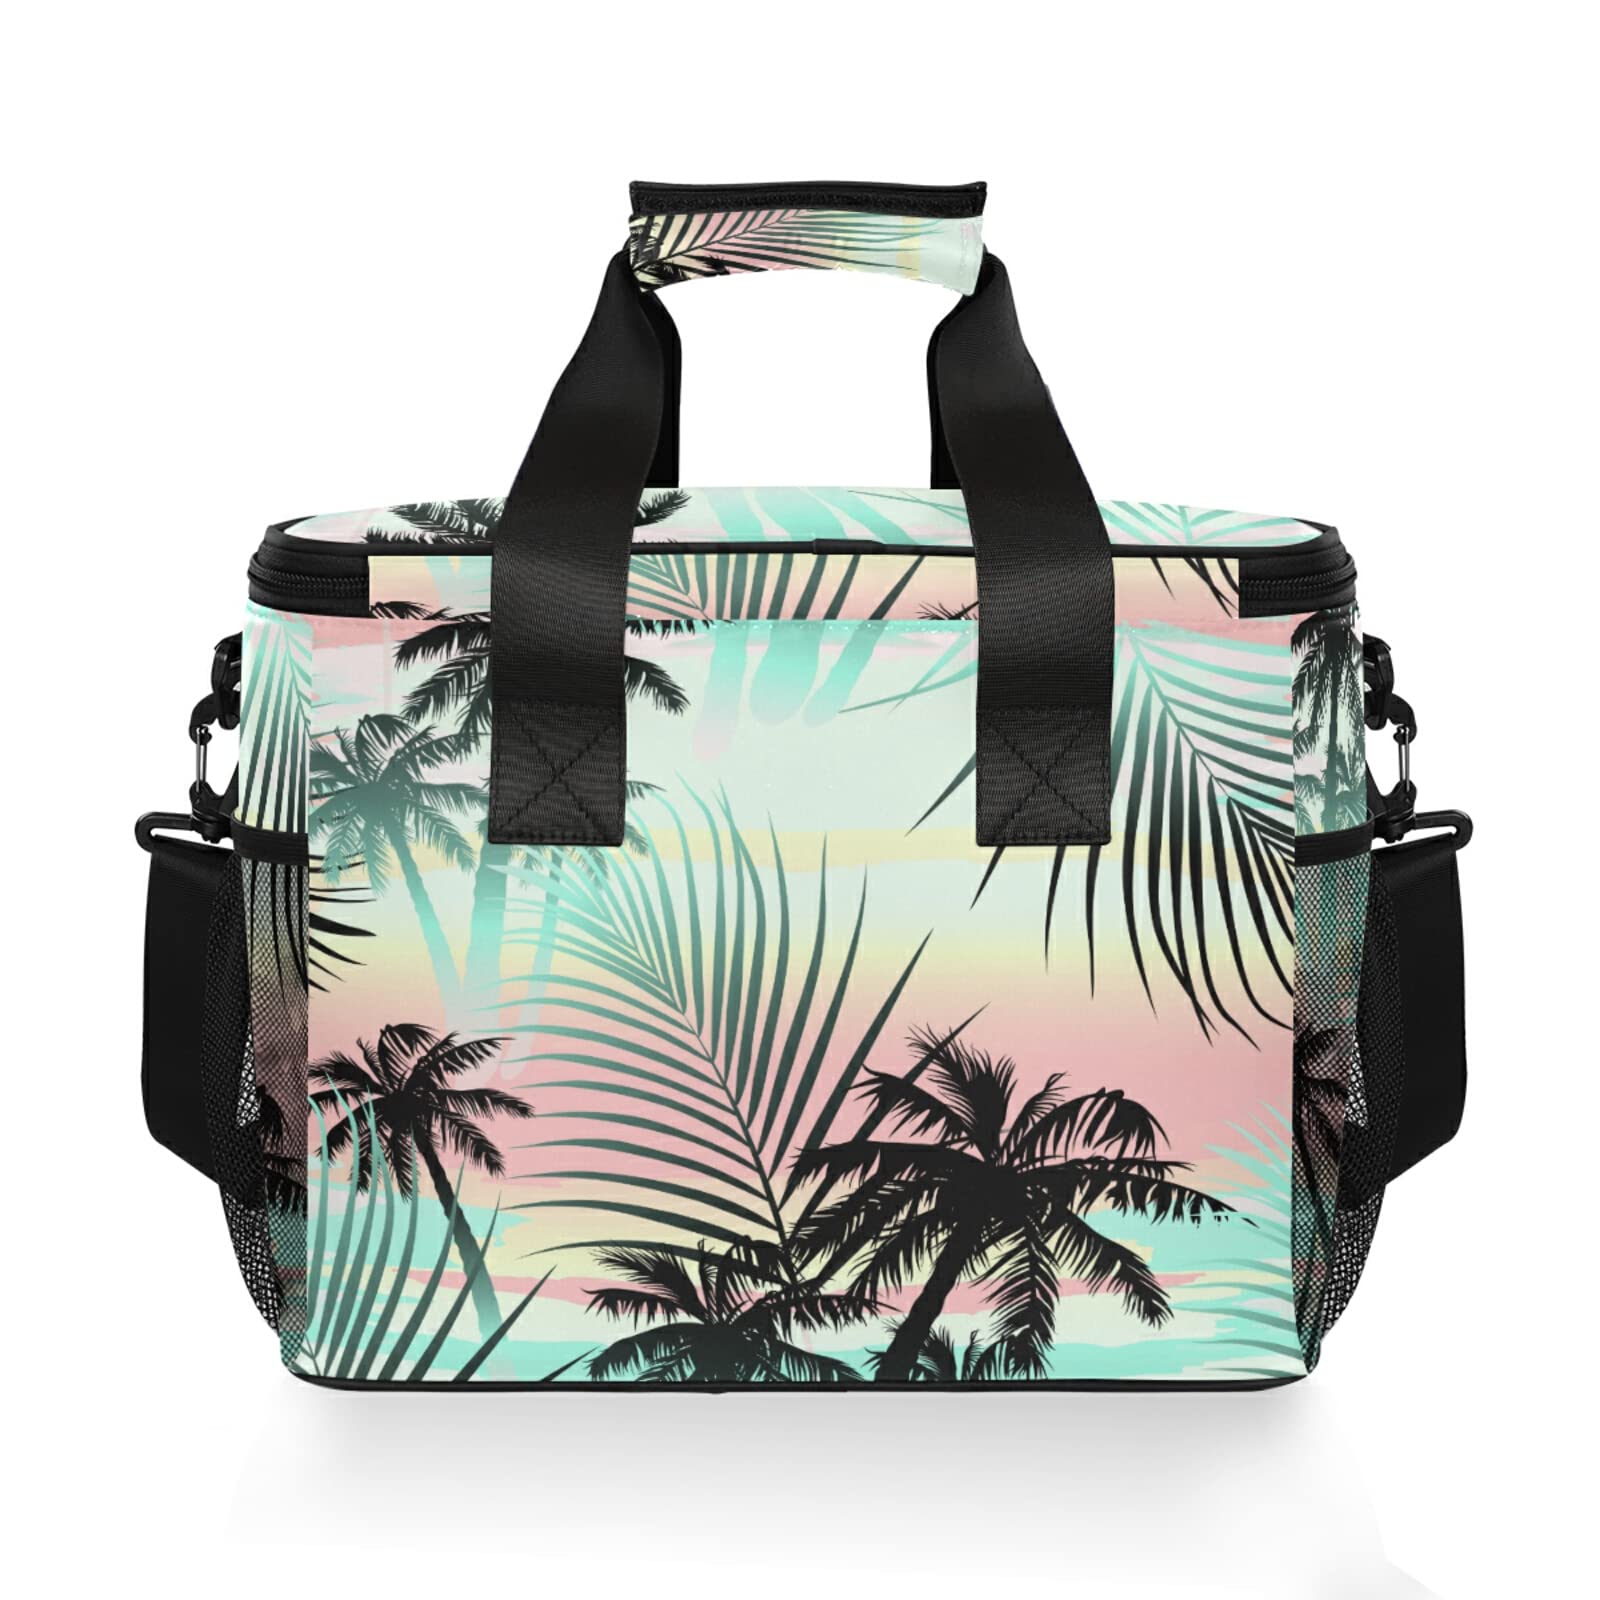 OTVEE Tropical Summer Palm Trees Lunch Bag Tote Large Picnic Reusable Insulated Cooler Lunch Box with Adjustable Shoulder Strap